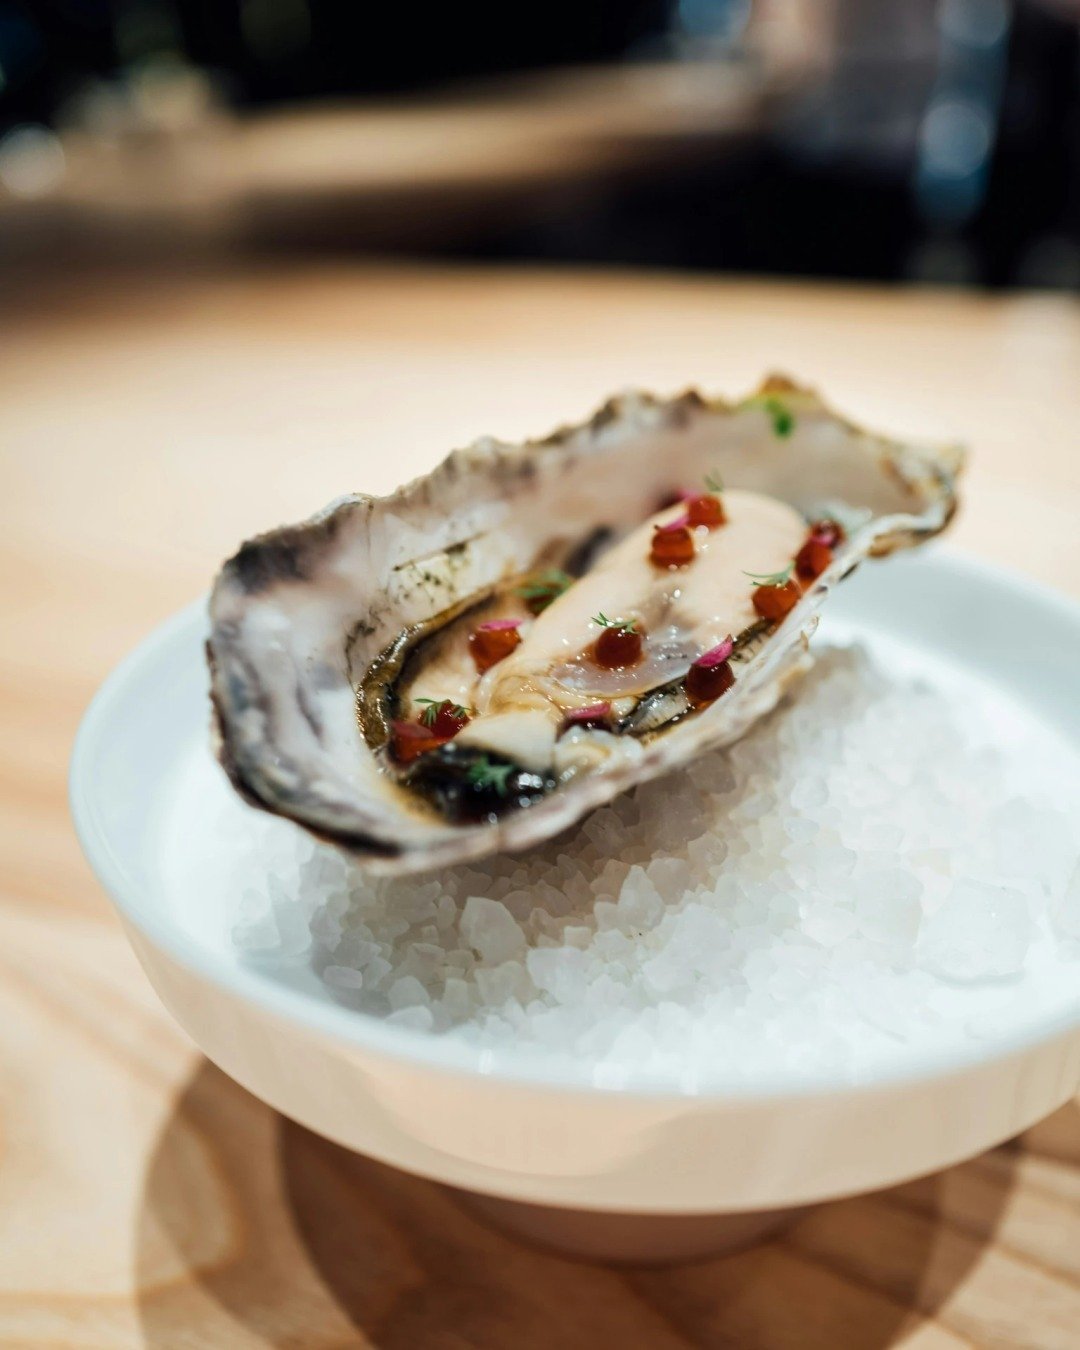 Not only are oysters delicious, but they're also brimming with essential nutrients. From heart-healthy omega-3s to immune-boosting minerals, indulge in oysters and nourish your body from within! 💪🍽️

#OysterNutrition #HealthyIndulgence